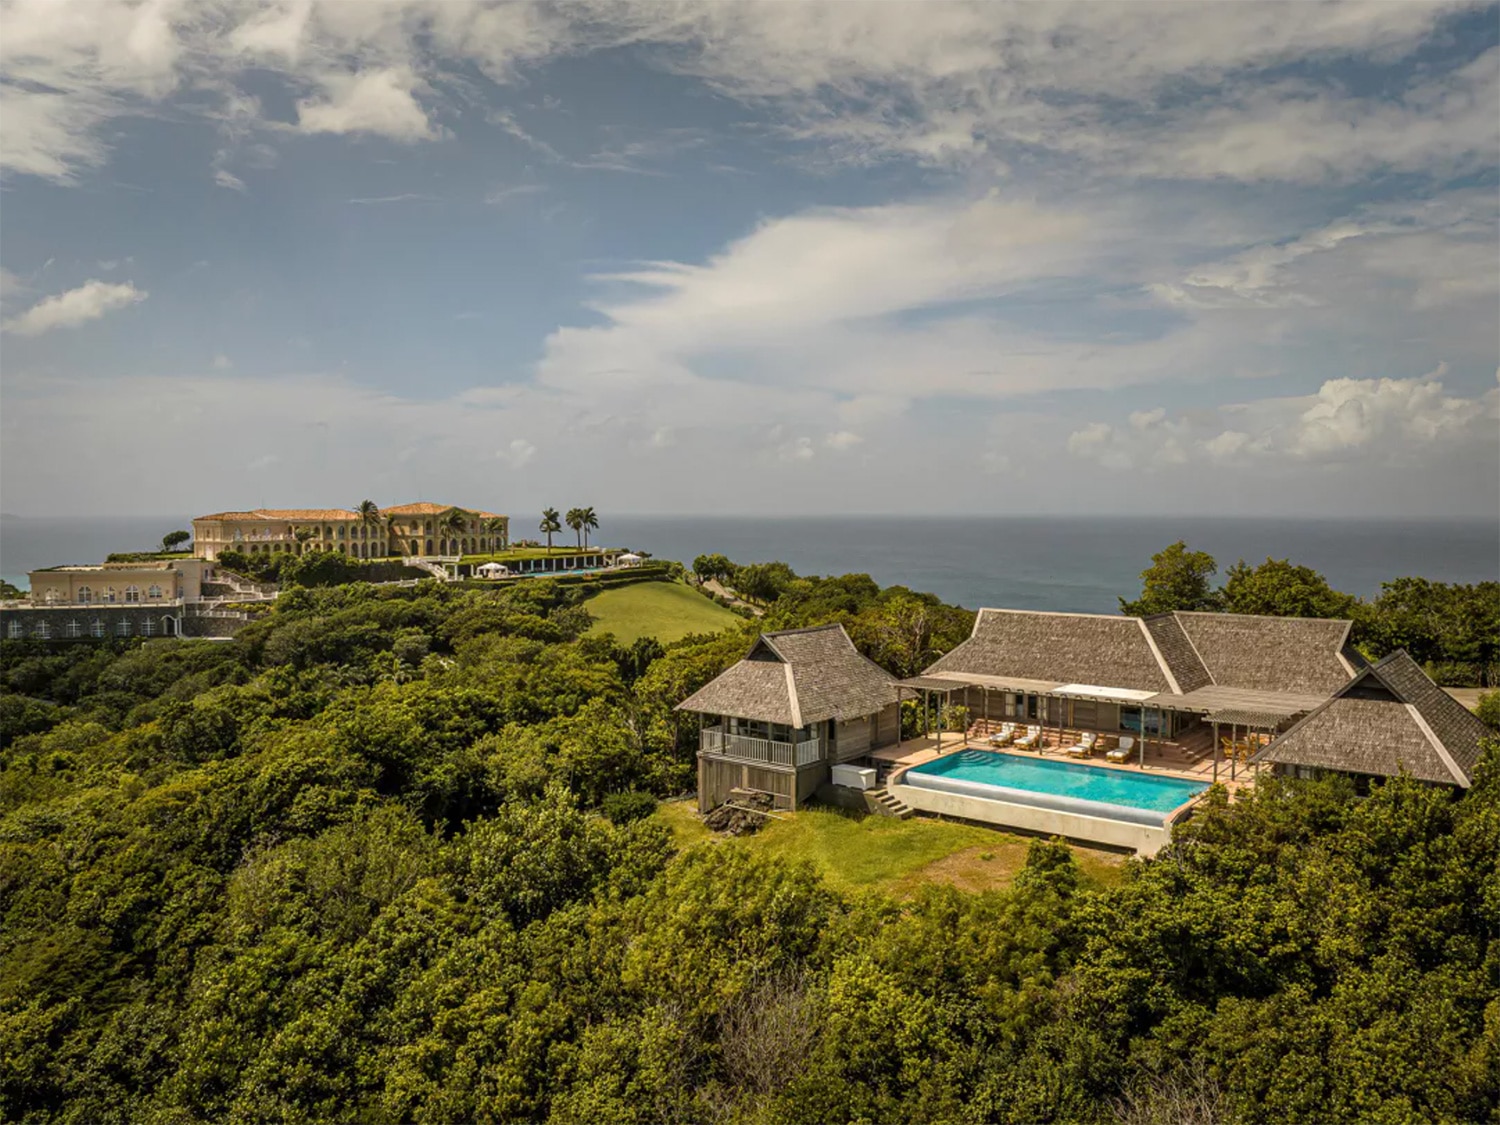 The private villa of The Terraces, a $200 million dream home on the Caribbean island of Mustique in St. Vincent and the Grenadines.